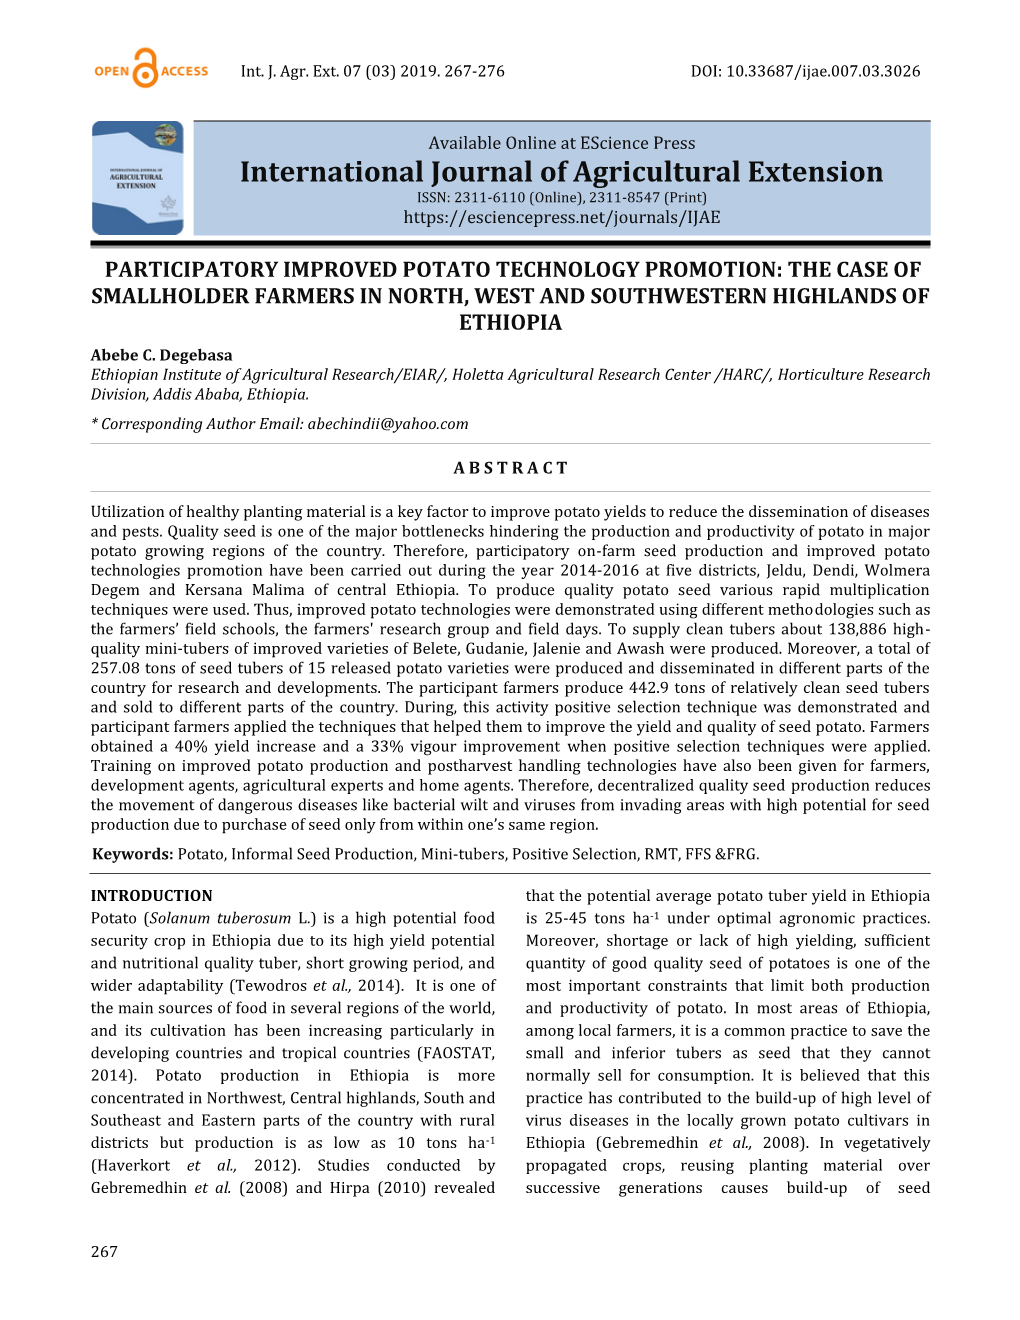 International Journal of Agricultural Extension ISSN: 2311-6110 (Online), 2311-8547 (Print)